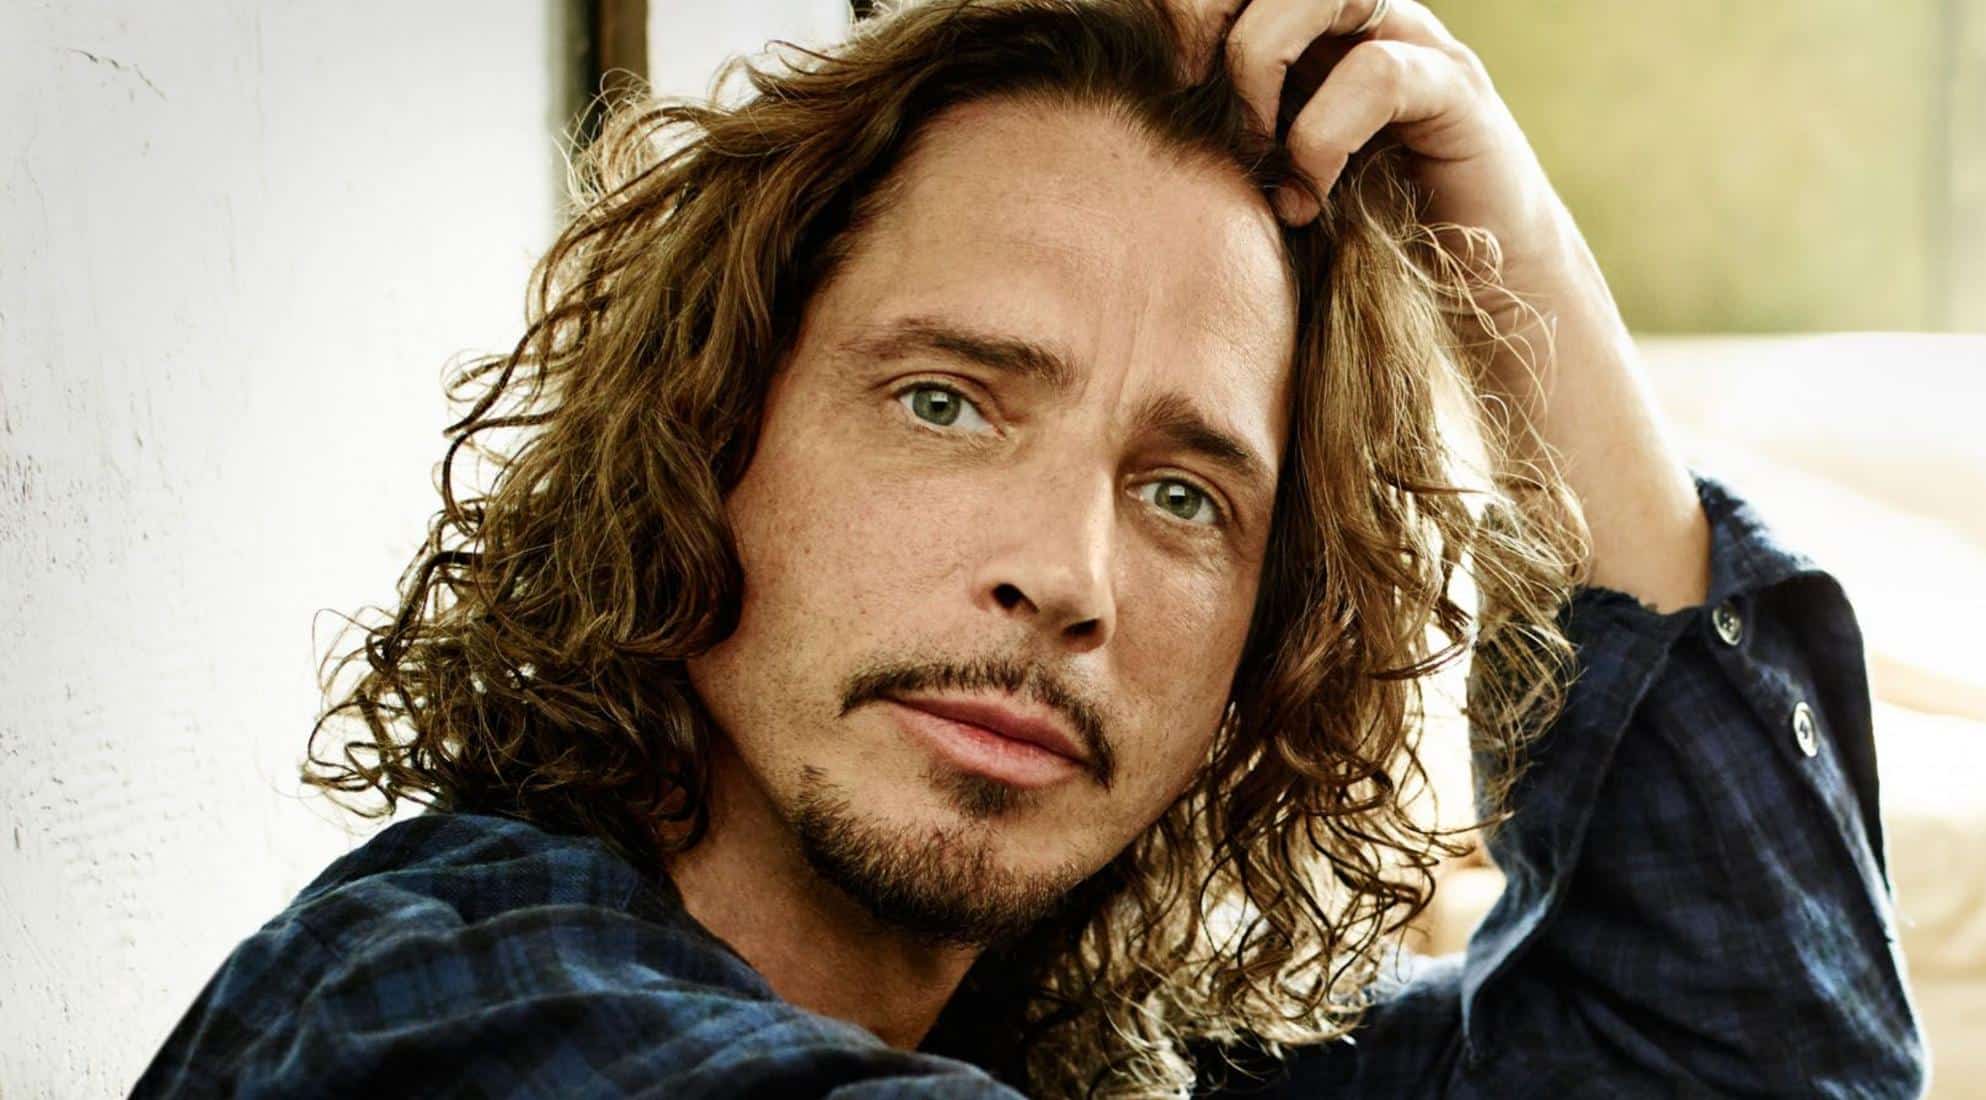 chris cornell death, SOUNDGARDEN Pay Tribute To CHRIS CORNELL On The Fifth Anniversary Of His Death